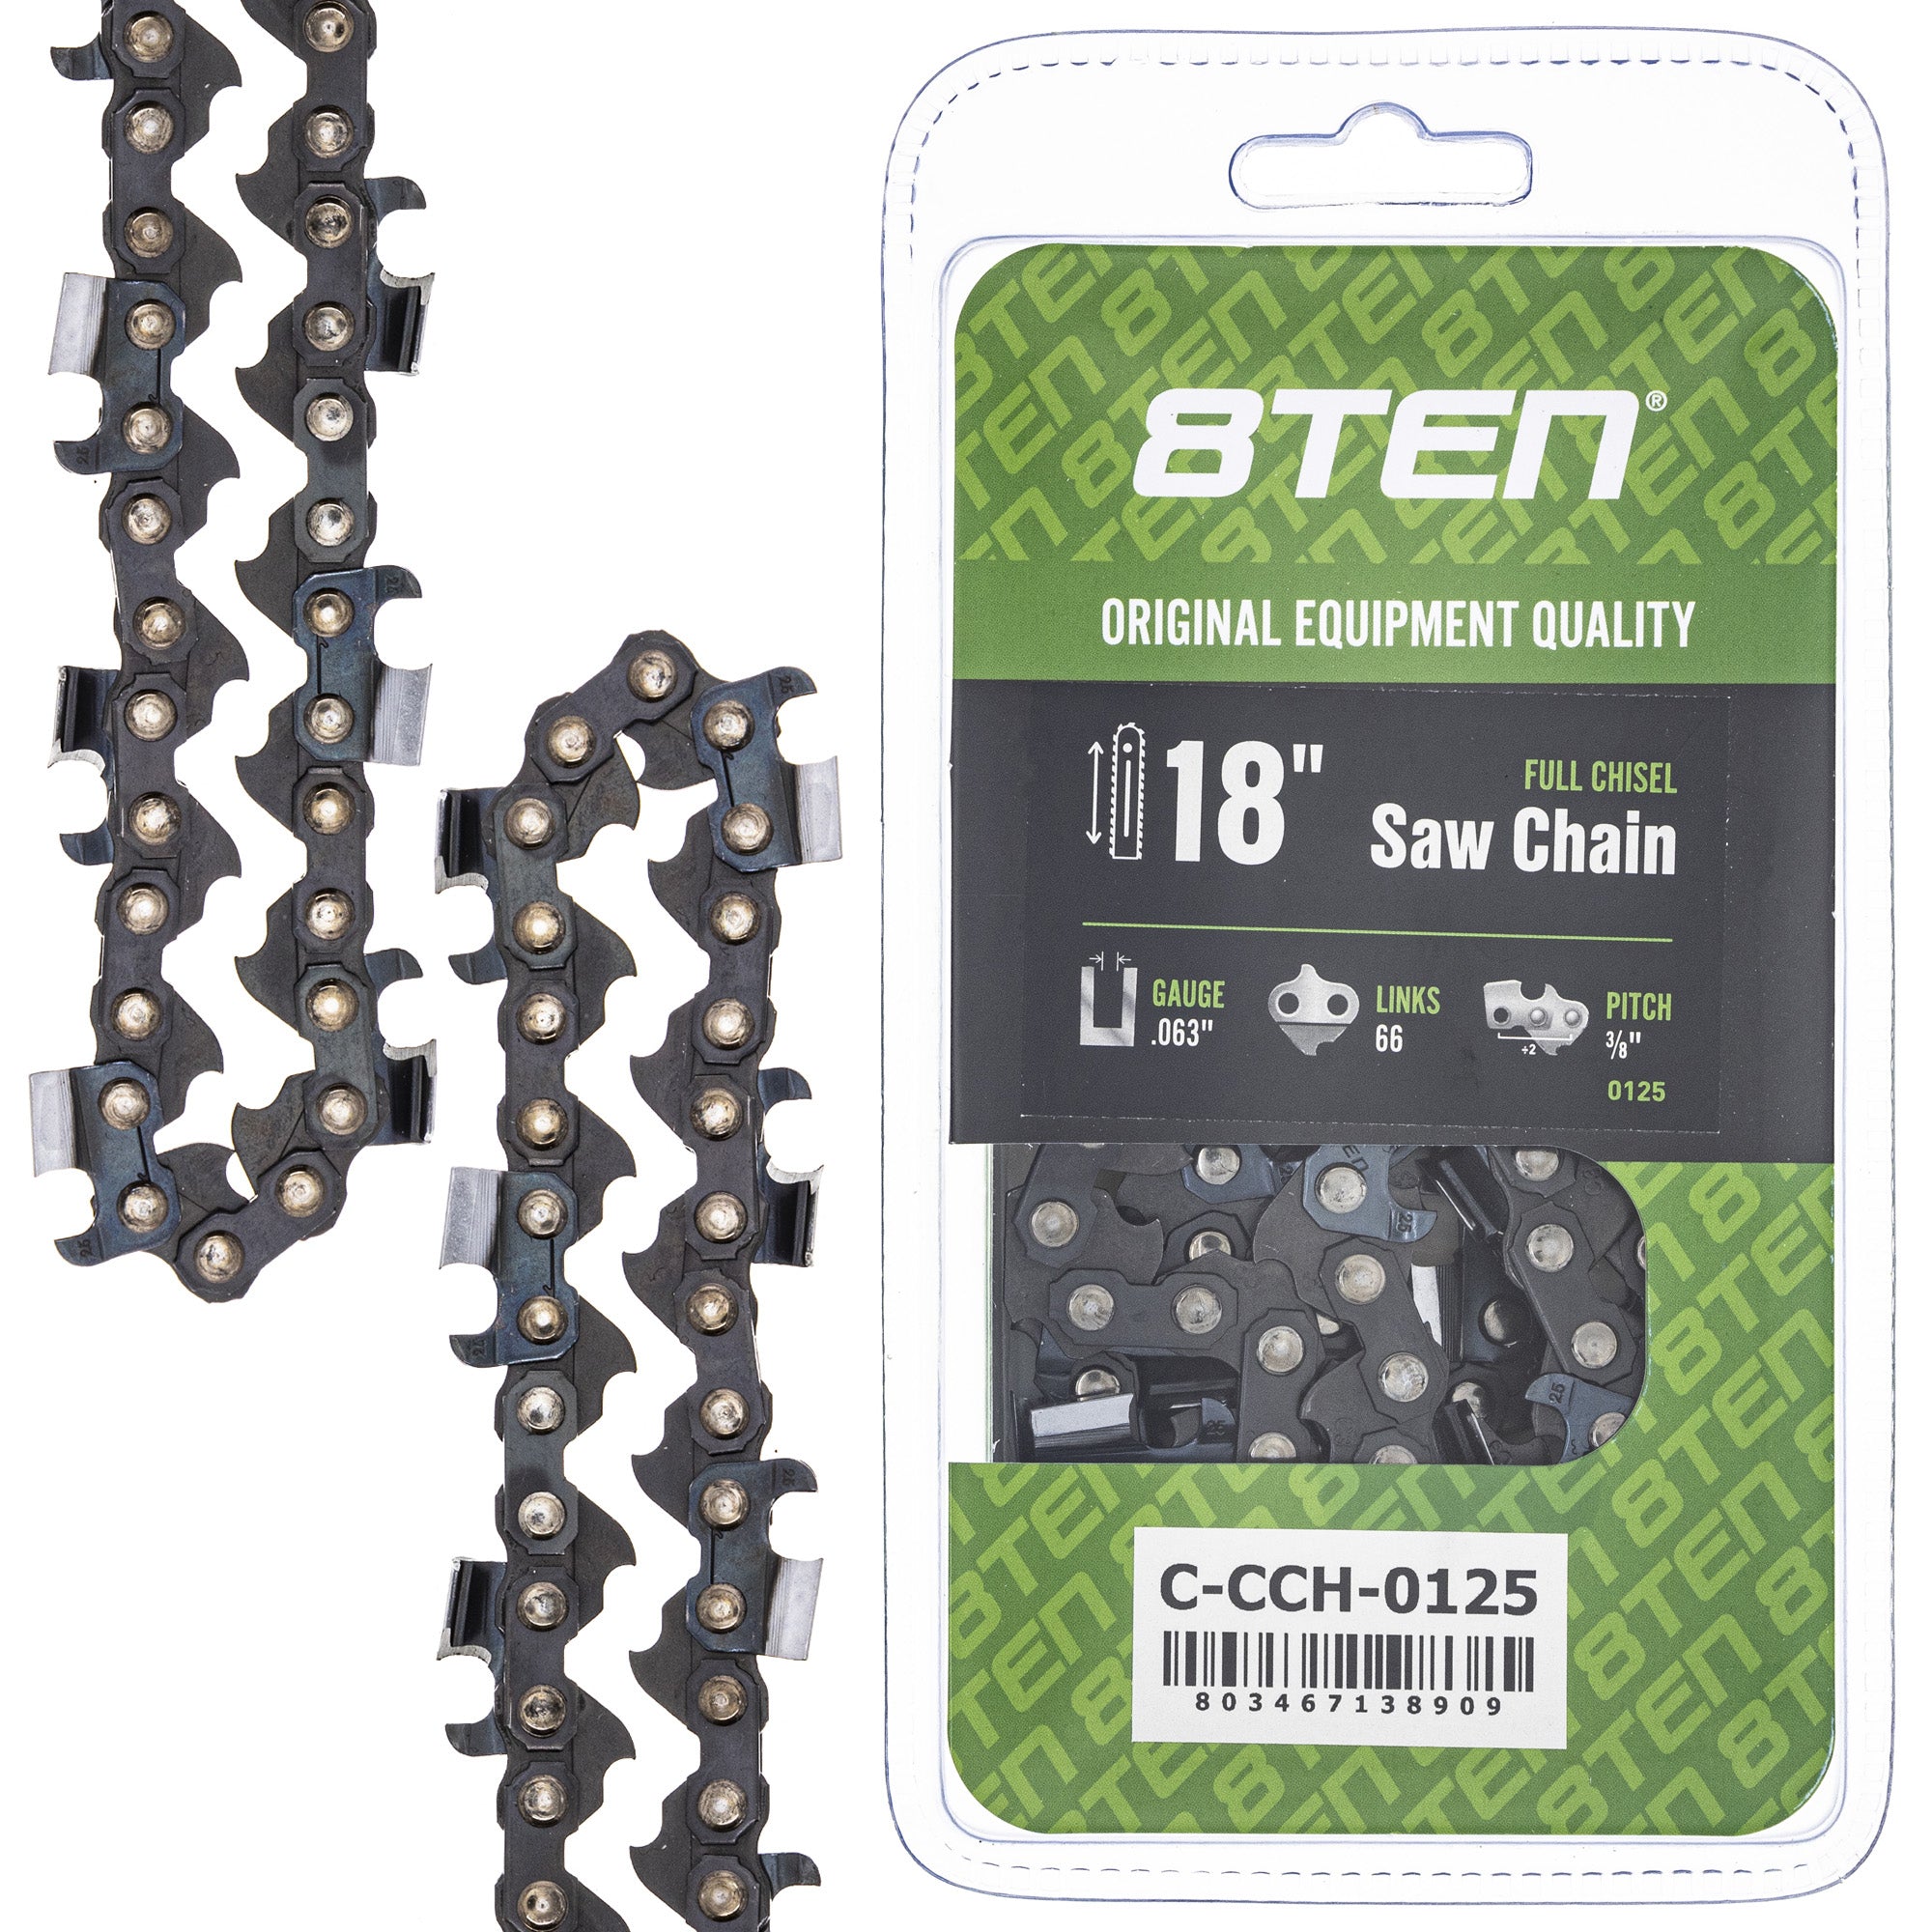 8TEN MK1010428 Guide Bar & Chain for MSE MS E 066